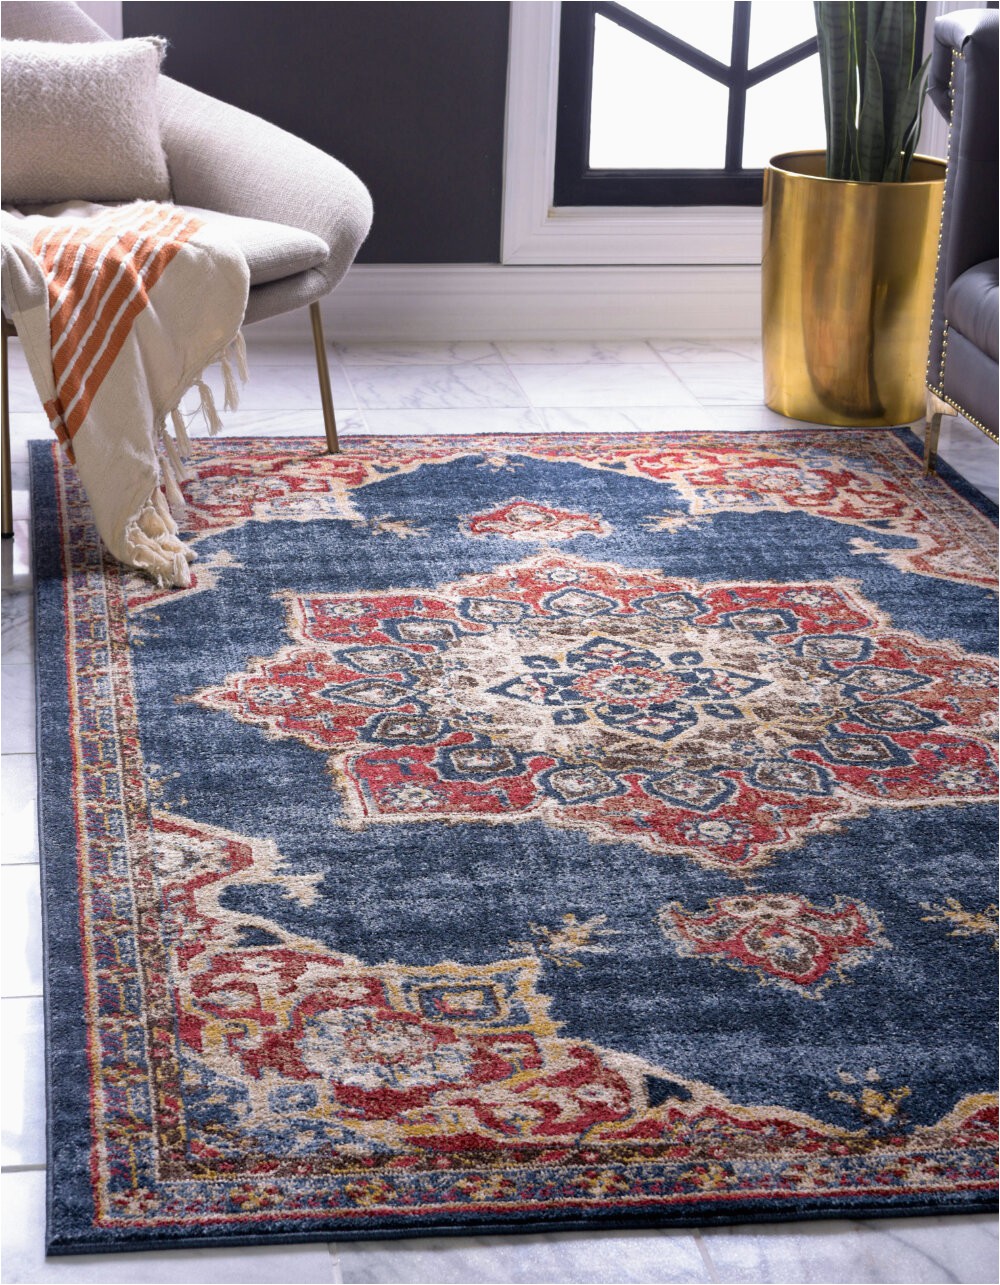 Navy Blue and Beige area Rugs Dulin Persian Inspired Navy Blue area Rug